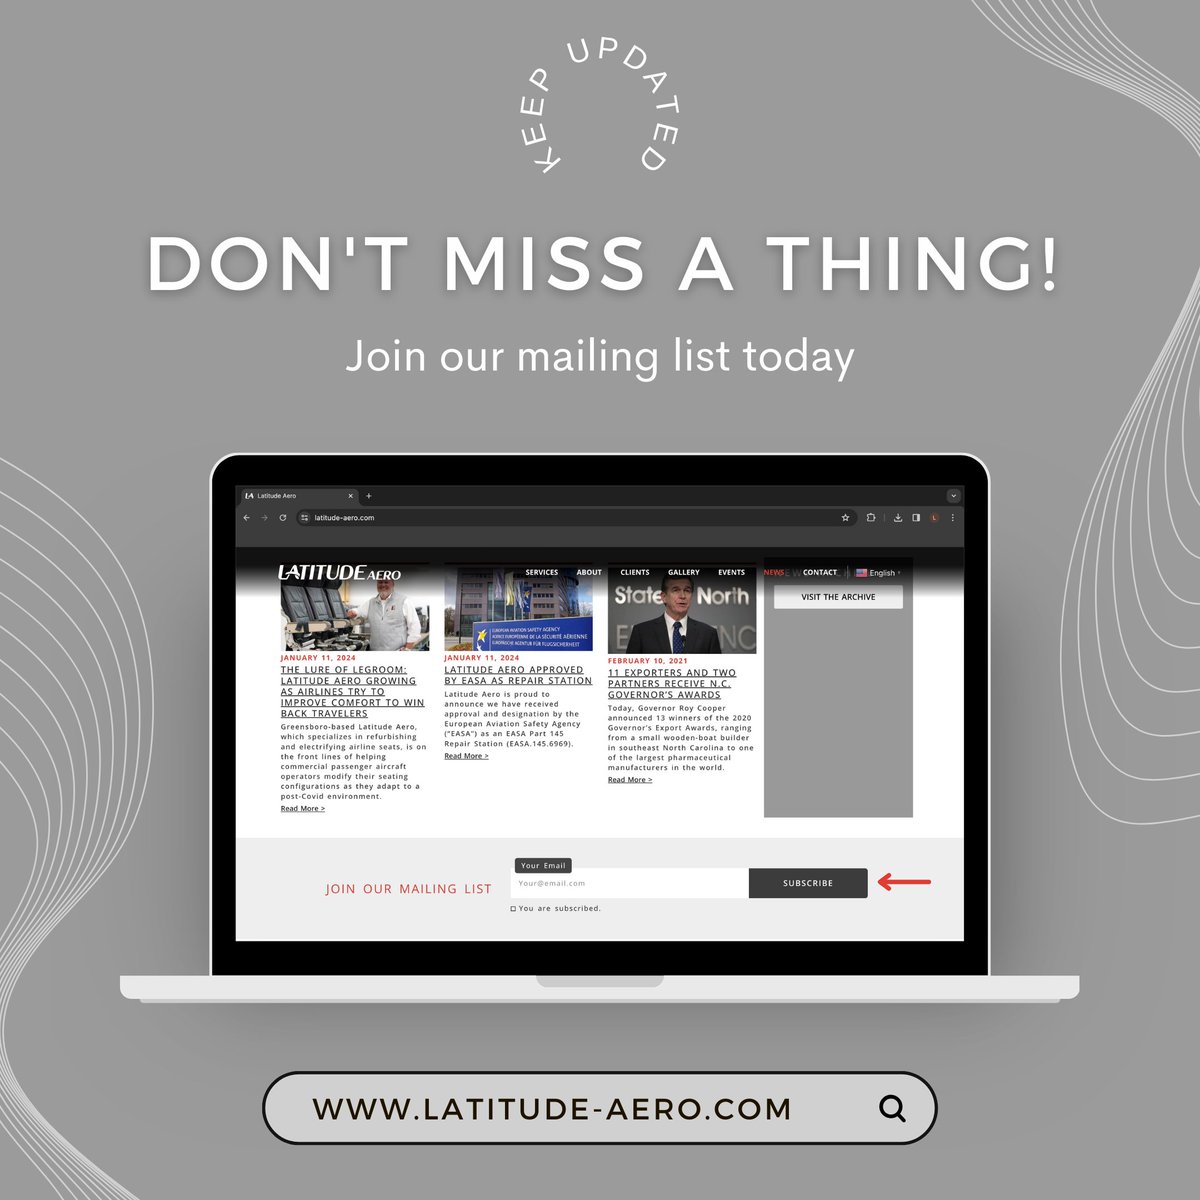 ✈️ Stay in the loop with all things Latitude Aero! 🌐 Subscribe to our #newsletter and be the first to know about exciting activities, events, and updates. 📬 Don't miss out – sign up now at latitude-aero.com! #LatitudeAero #StayInformed #SubscribeNow #Aviation